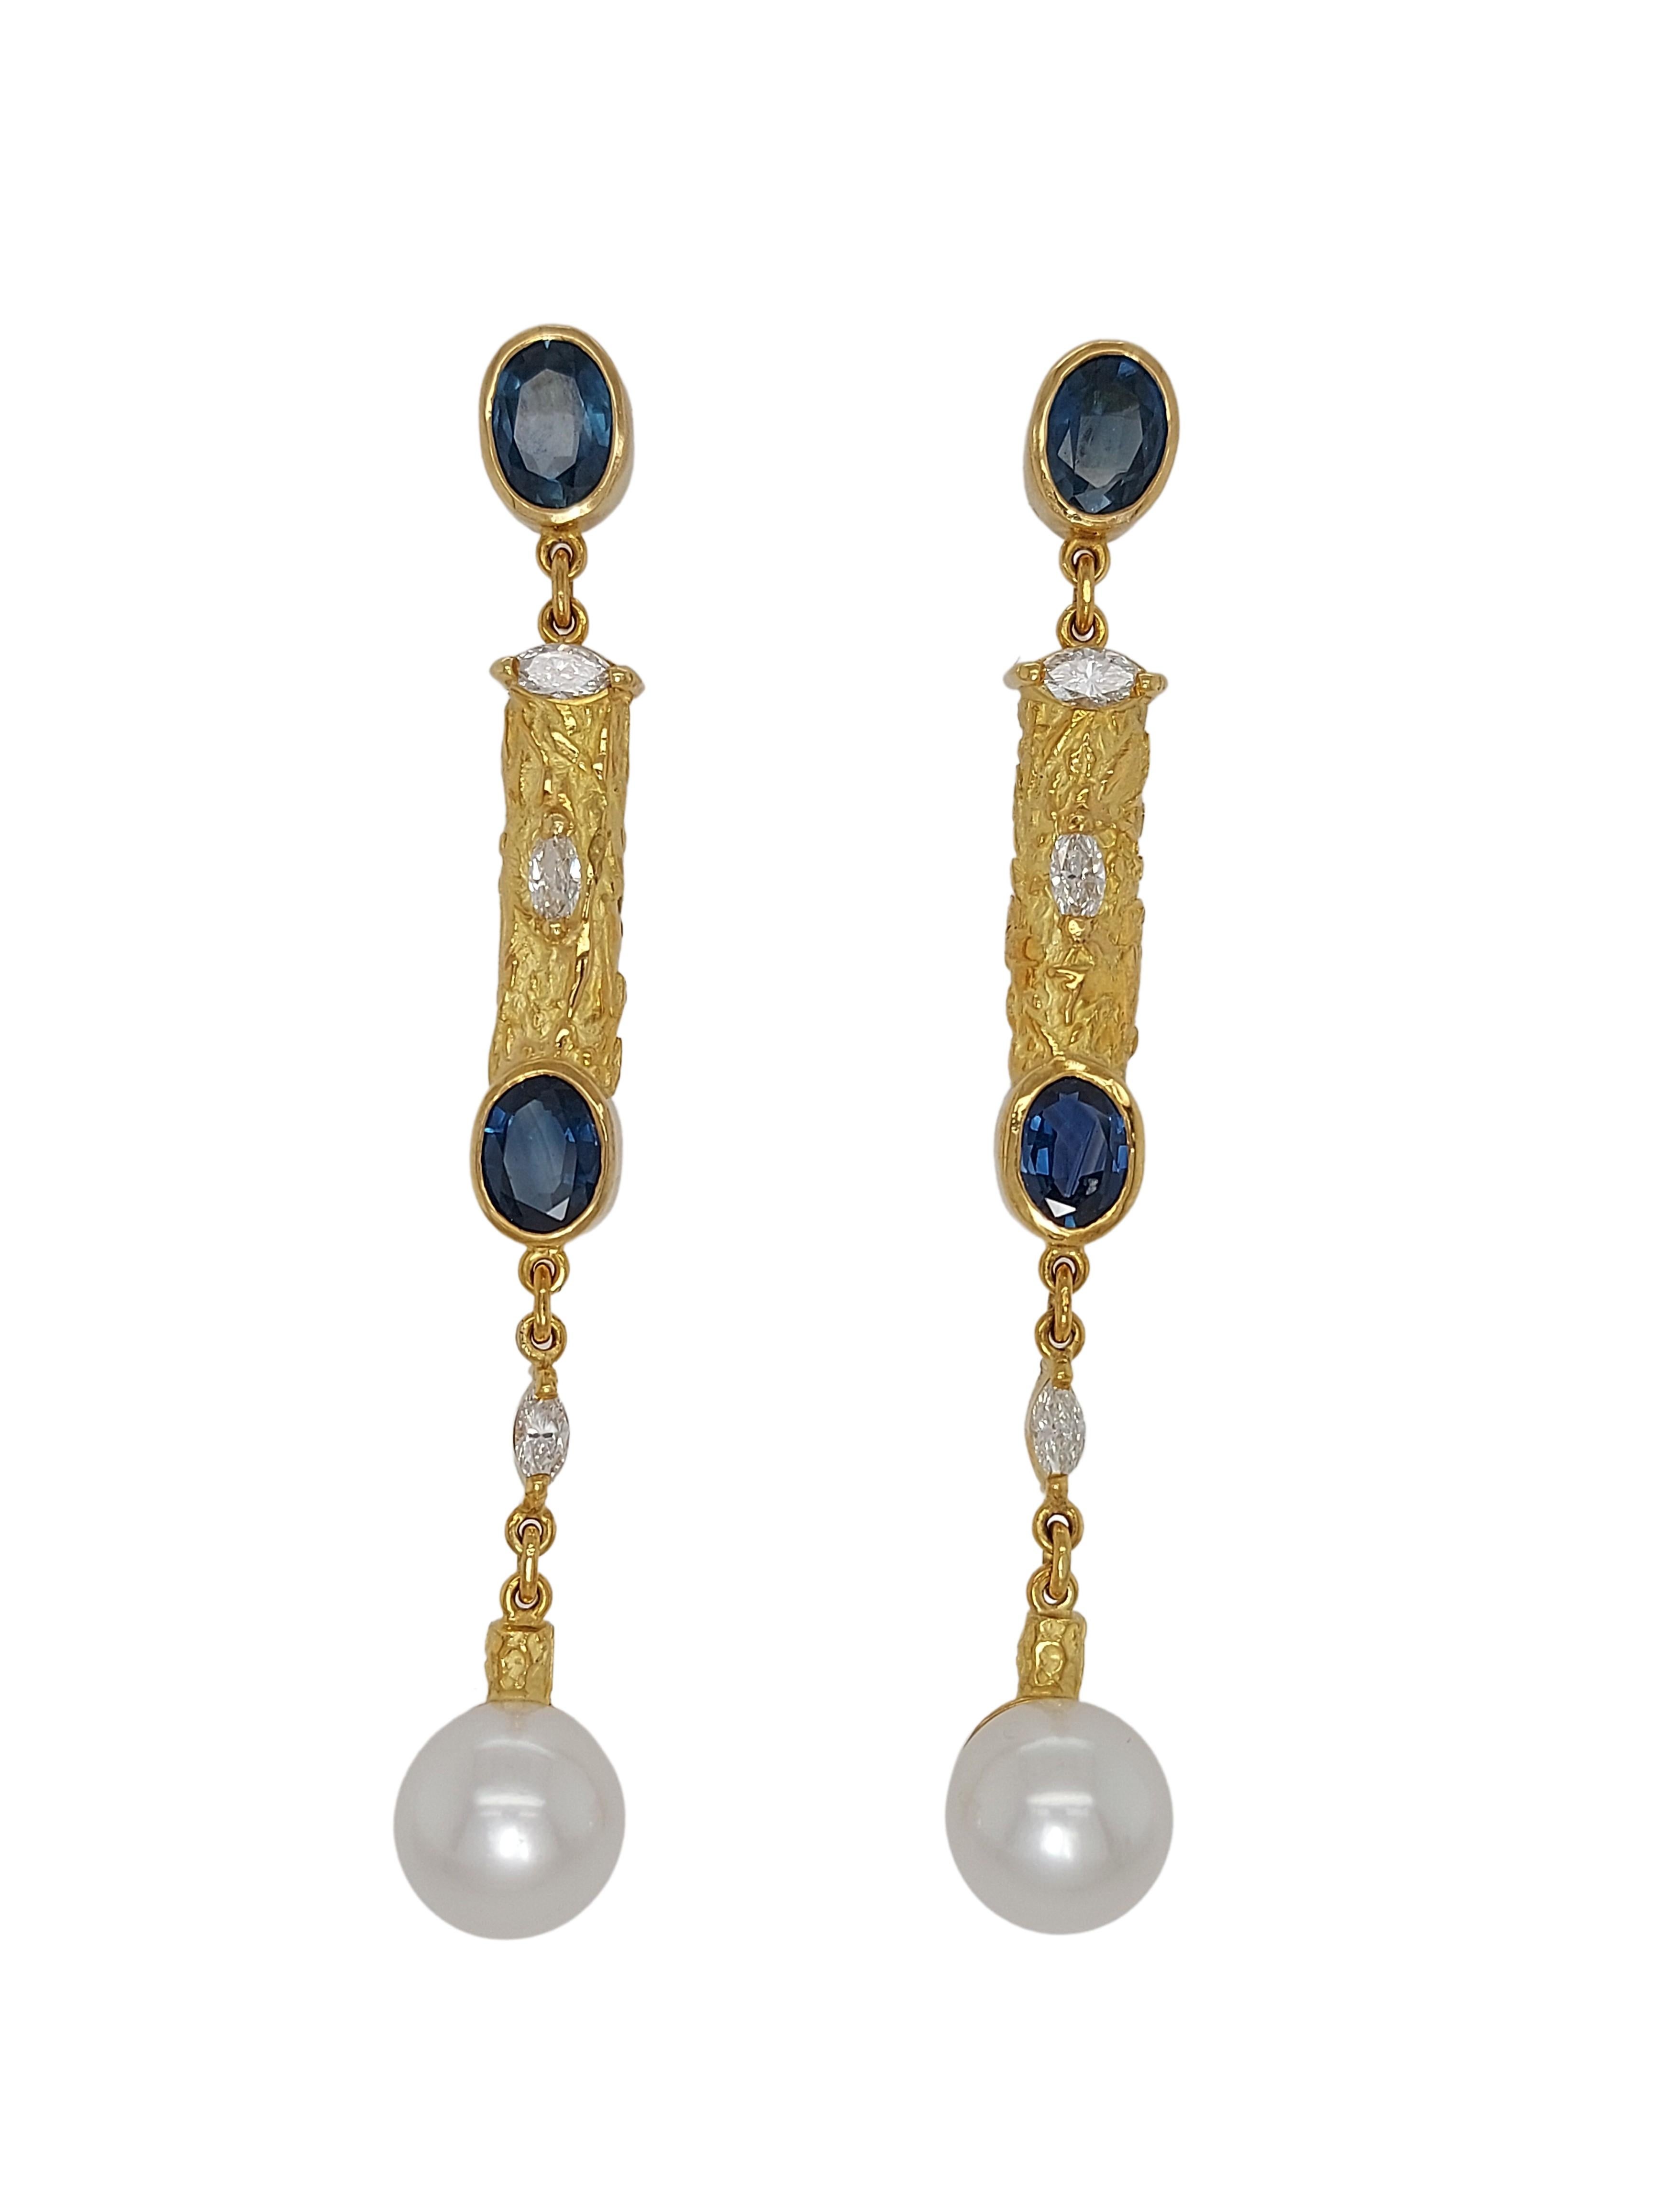 Artist J.P De Saedeleer 18 Kt gold Earrings with 5.84 Ct Sapphires, Diamonds, Pearl For Sale